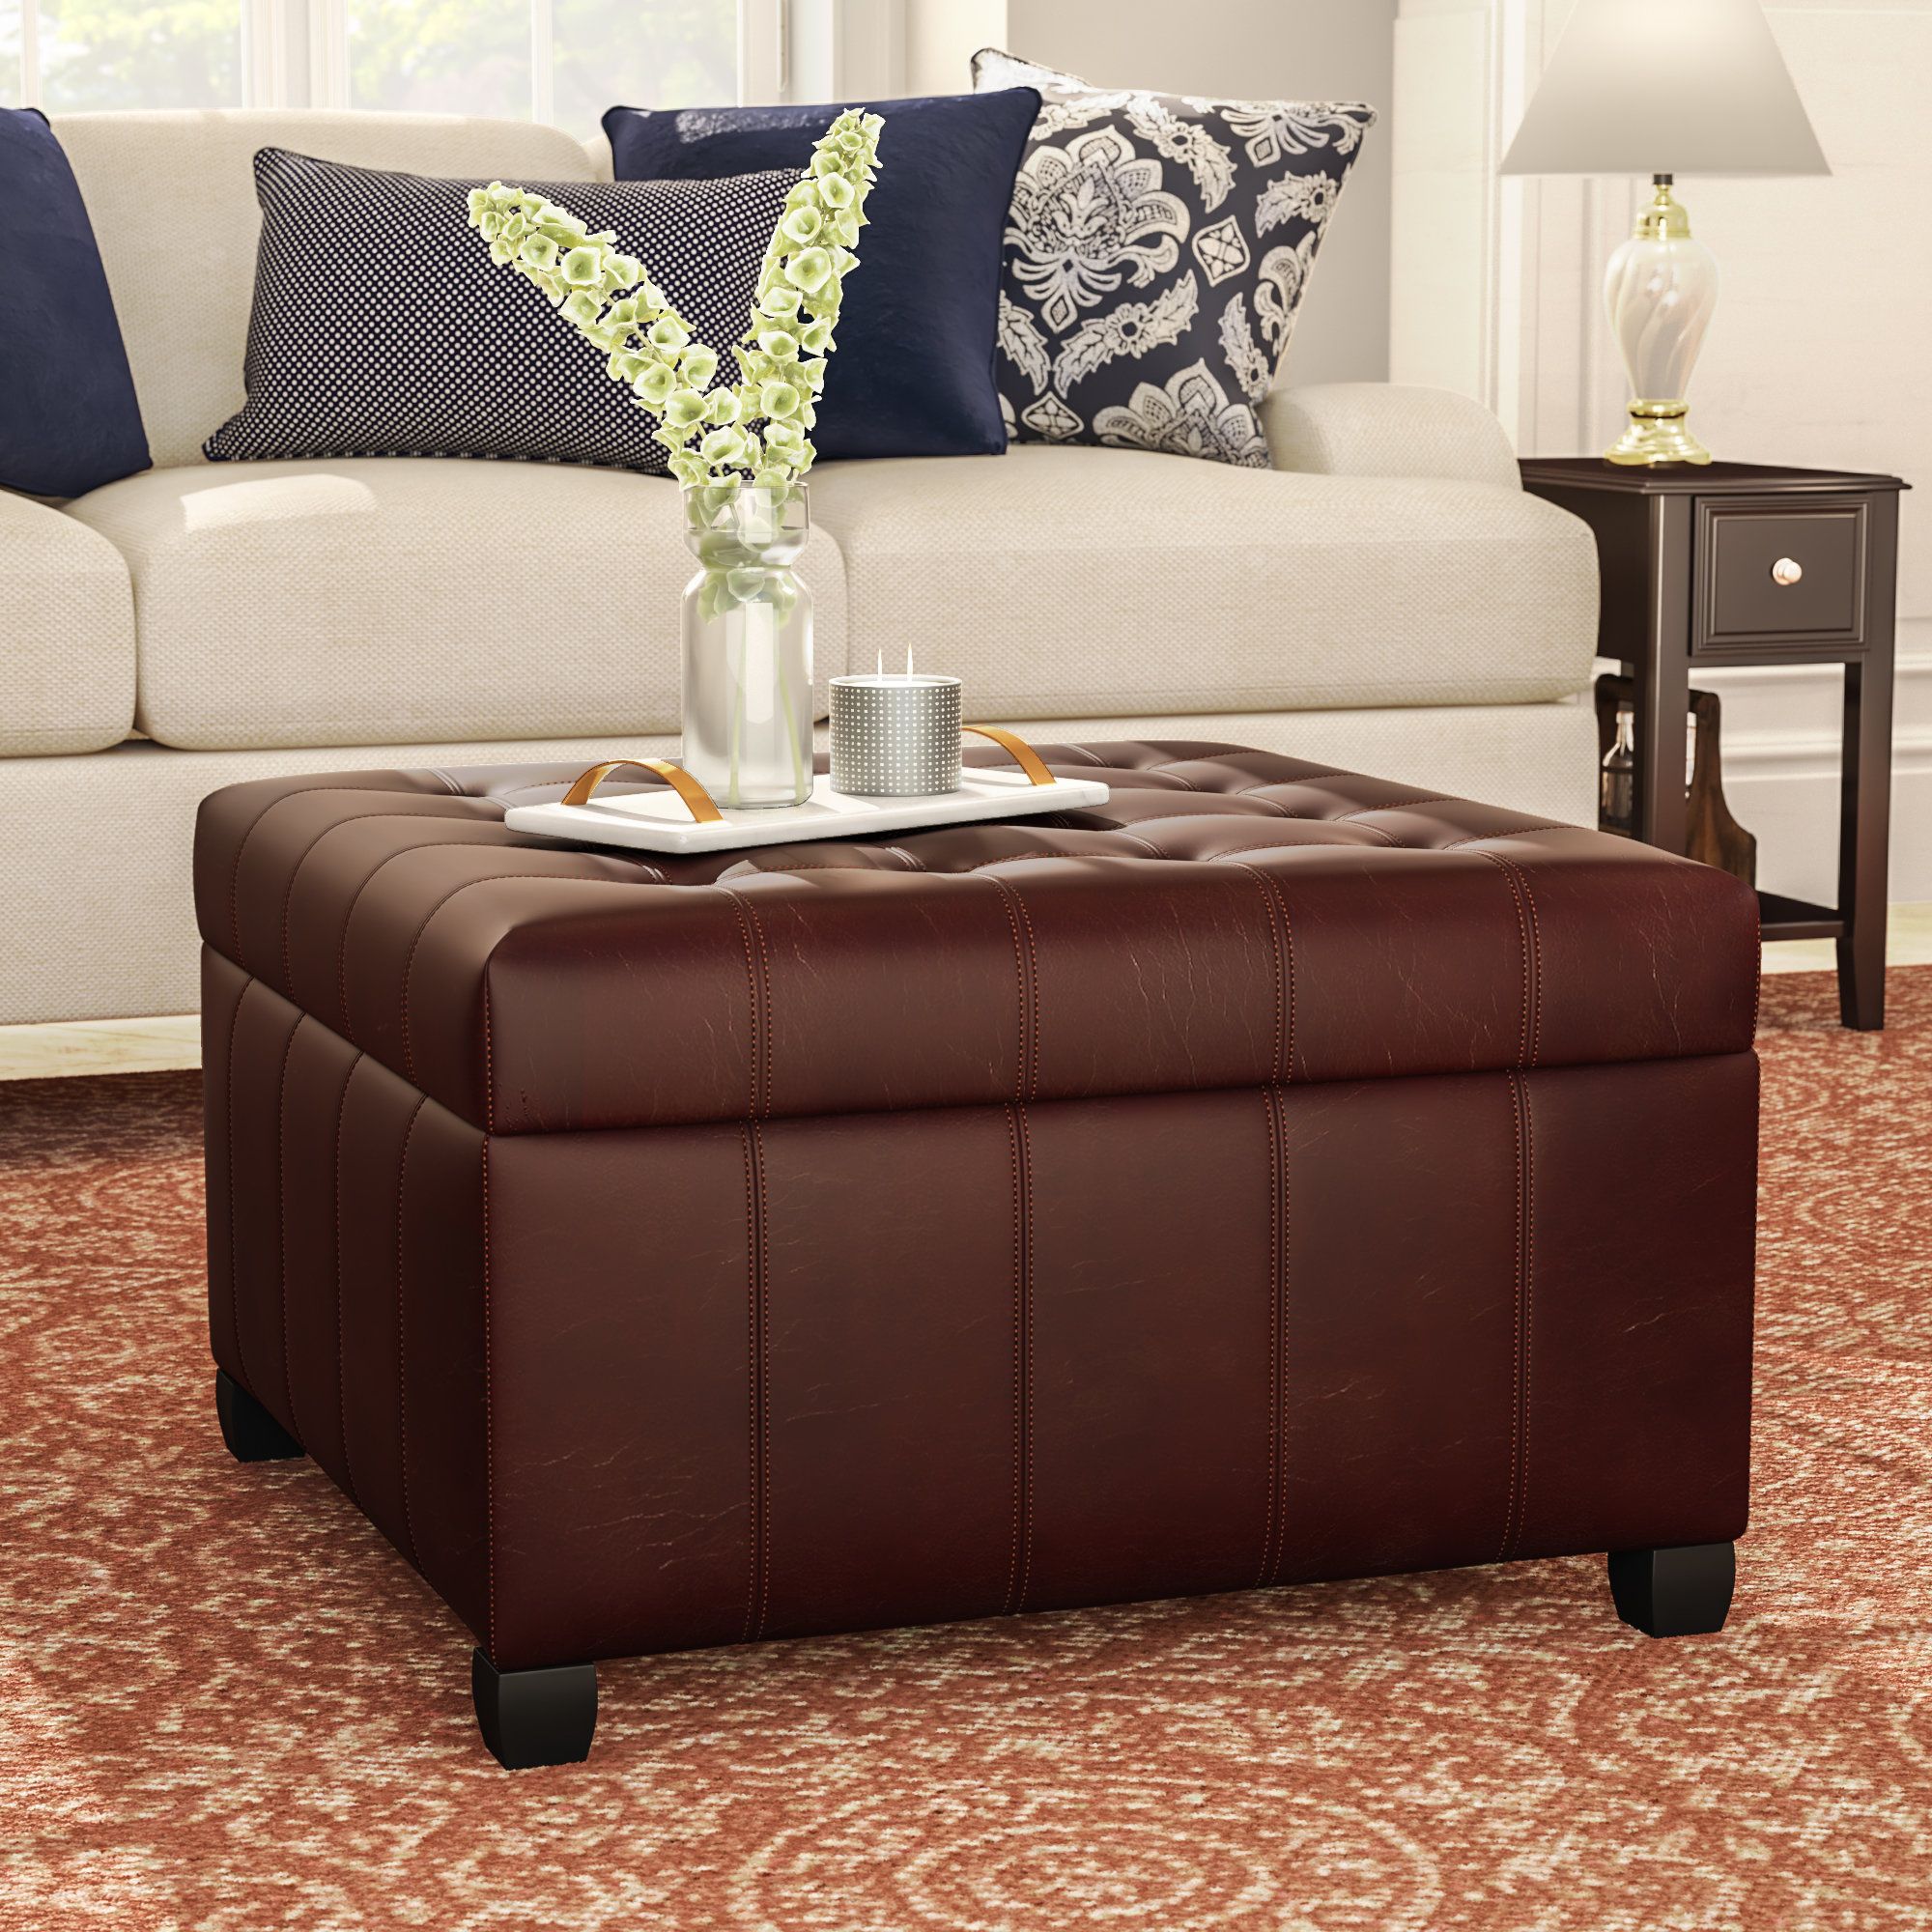 Popular Leather Storage Ottoman Coffee Table • Display Cabinet Intended For Espresso Leather And Tan Canvas Pouf Ottomans (View 2 of 10)